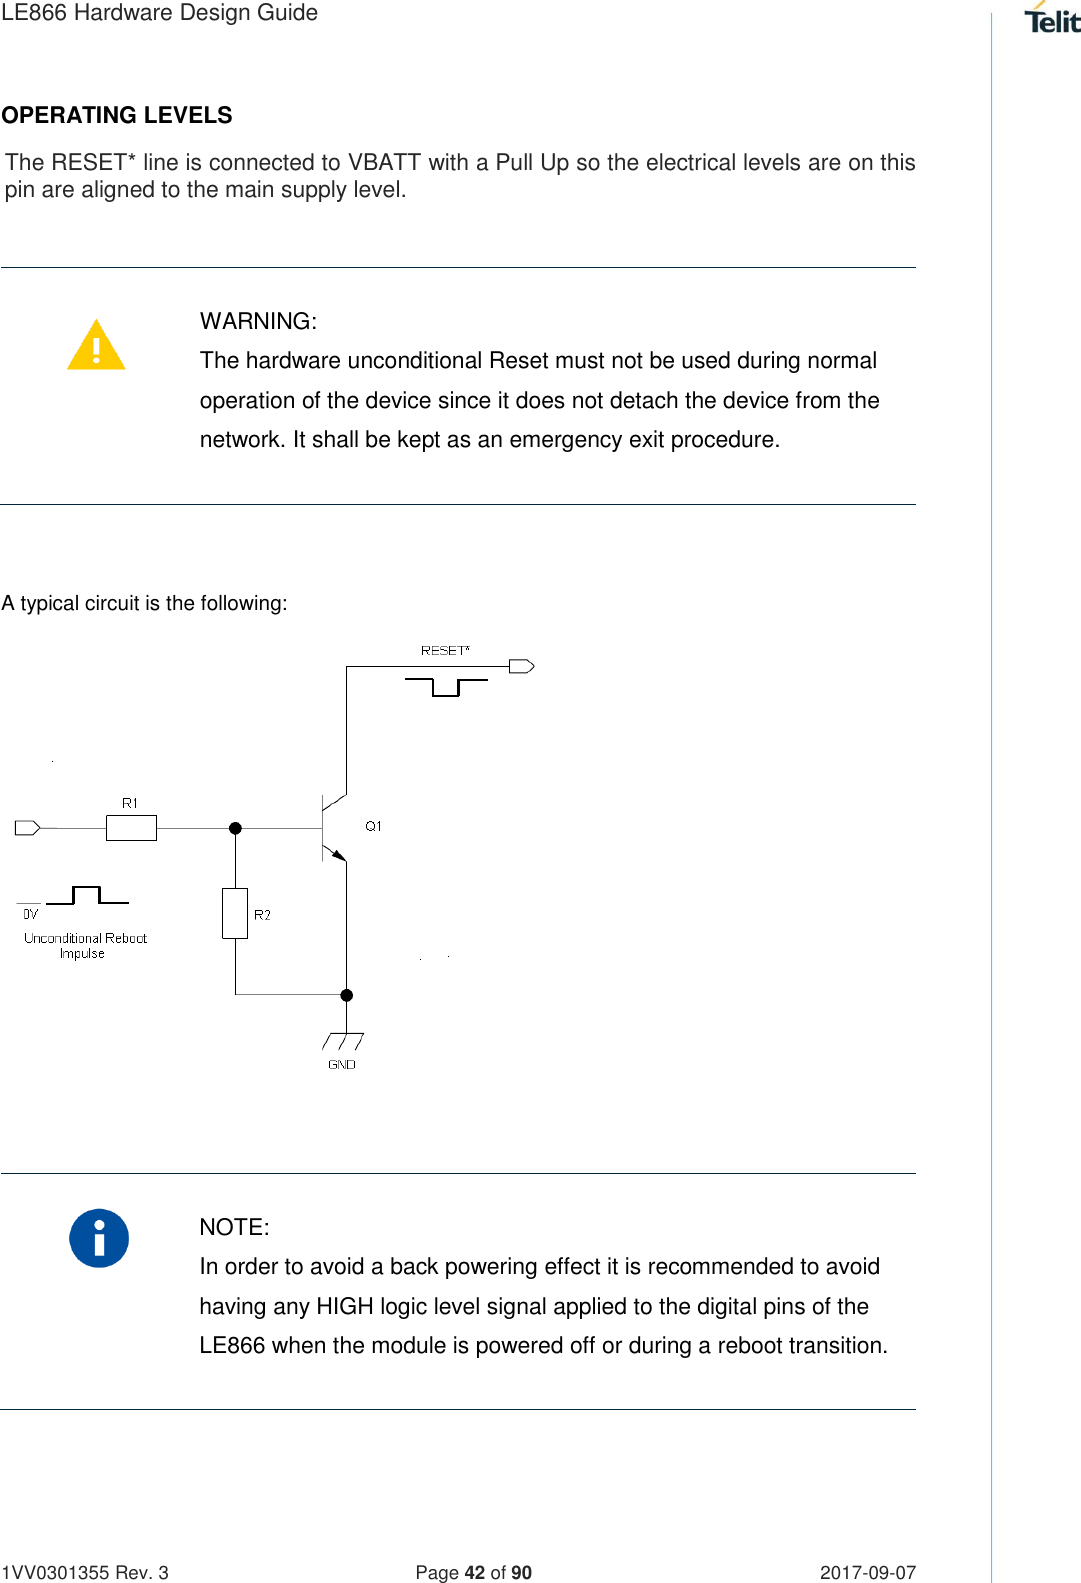 LE866 Hardware Design Guide   1VV0301355 Rev. 3   Page 42 of 90 2017-09-07  OPERATING LEVELS The RESET* line is connected to VBATT with a Pull Up so the electrical levels are on this pin are aligned to the main supply level.     WARNING: The hardware unconditional Reset must not be used during normal operation of the device since it does not detach the device from the network. It shall be kept as an emergency exit procedure.  A typical circuit is the following:          NOTE: In order to avoid a back powering effect it is recommended to avoid having any HIGH logic level signal applied to the digital pins of the LE866 when the module is powered off or during a reboot transition.    